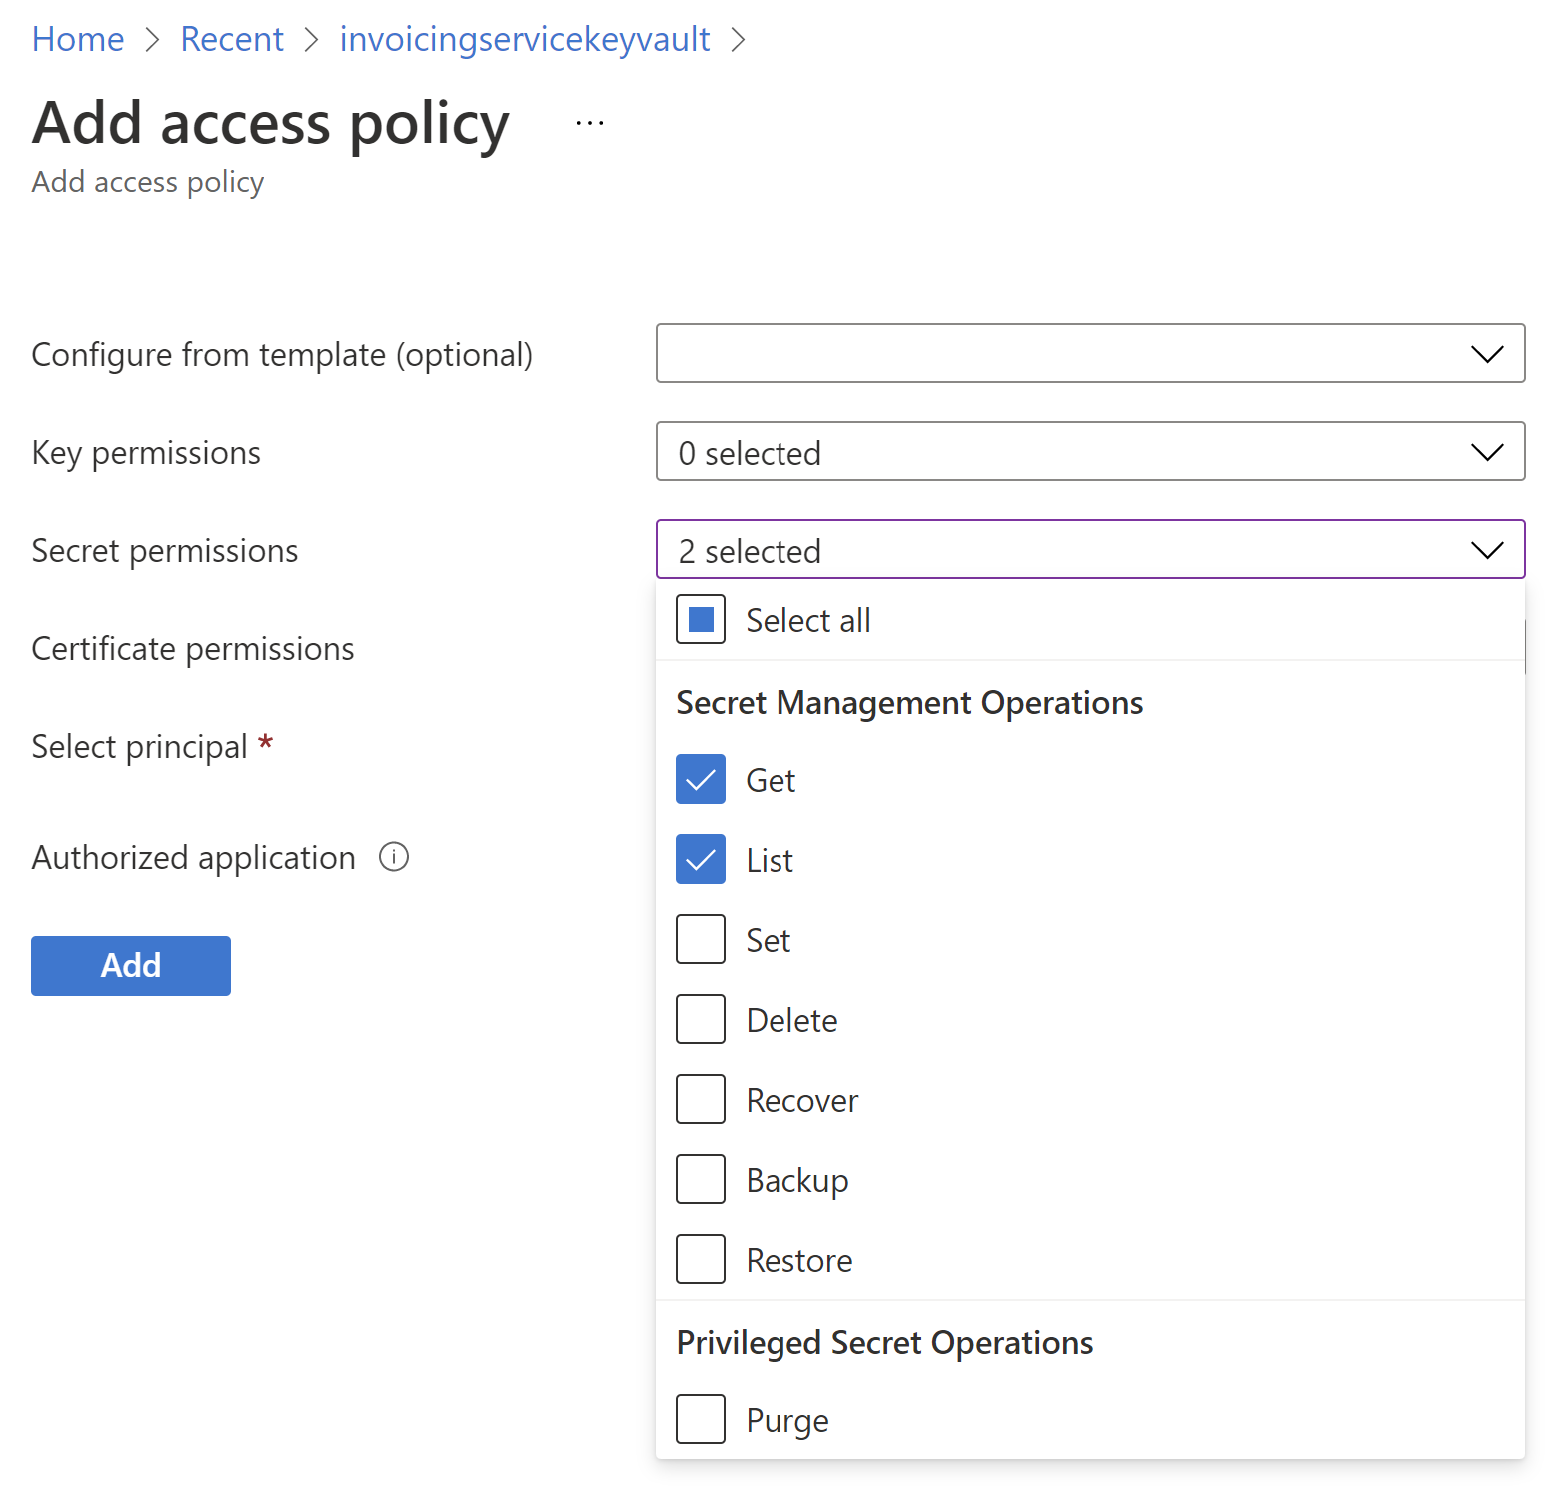 Secret permissions set for the Get and List operations on the Add access policy page.